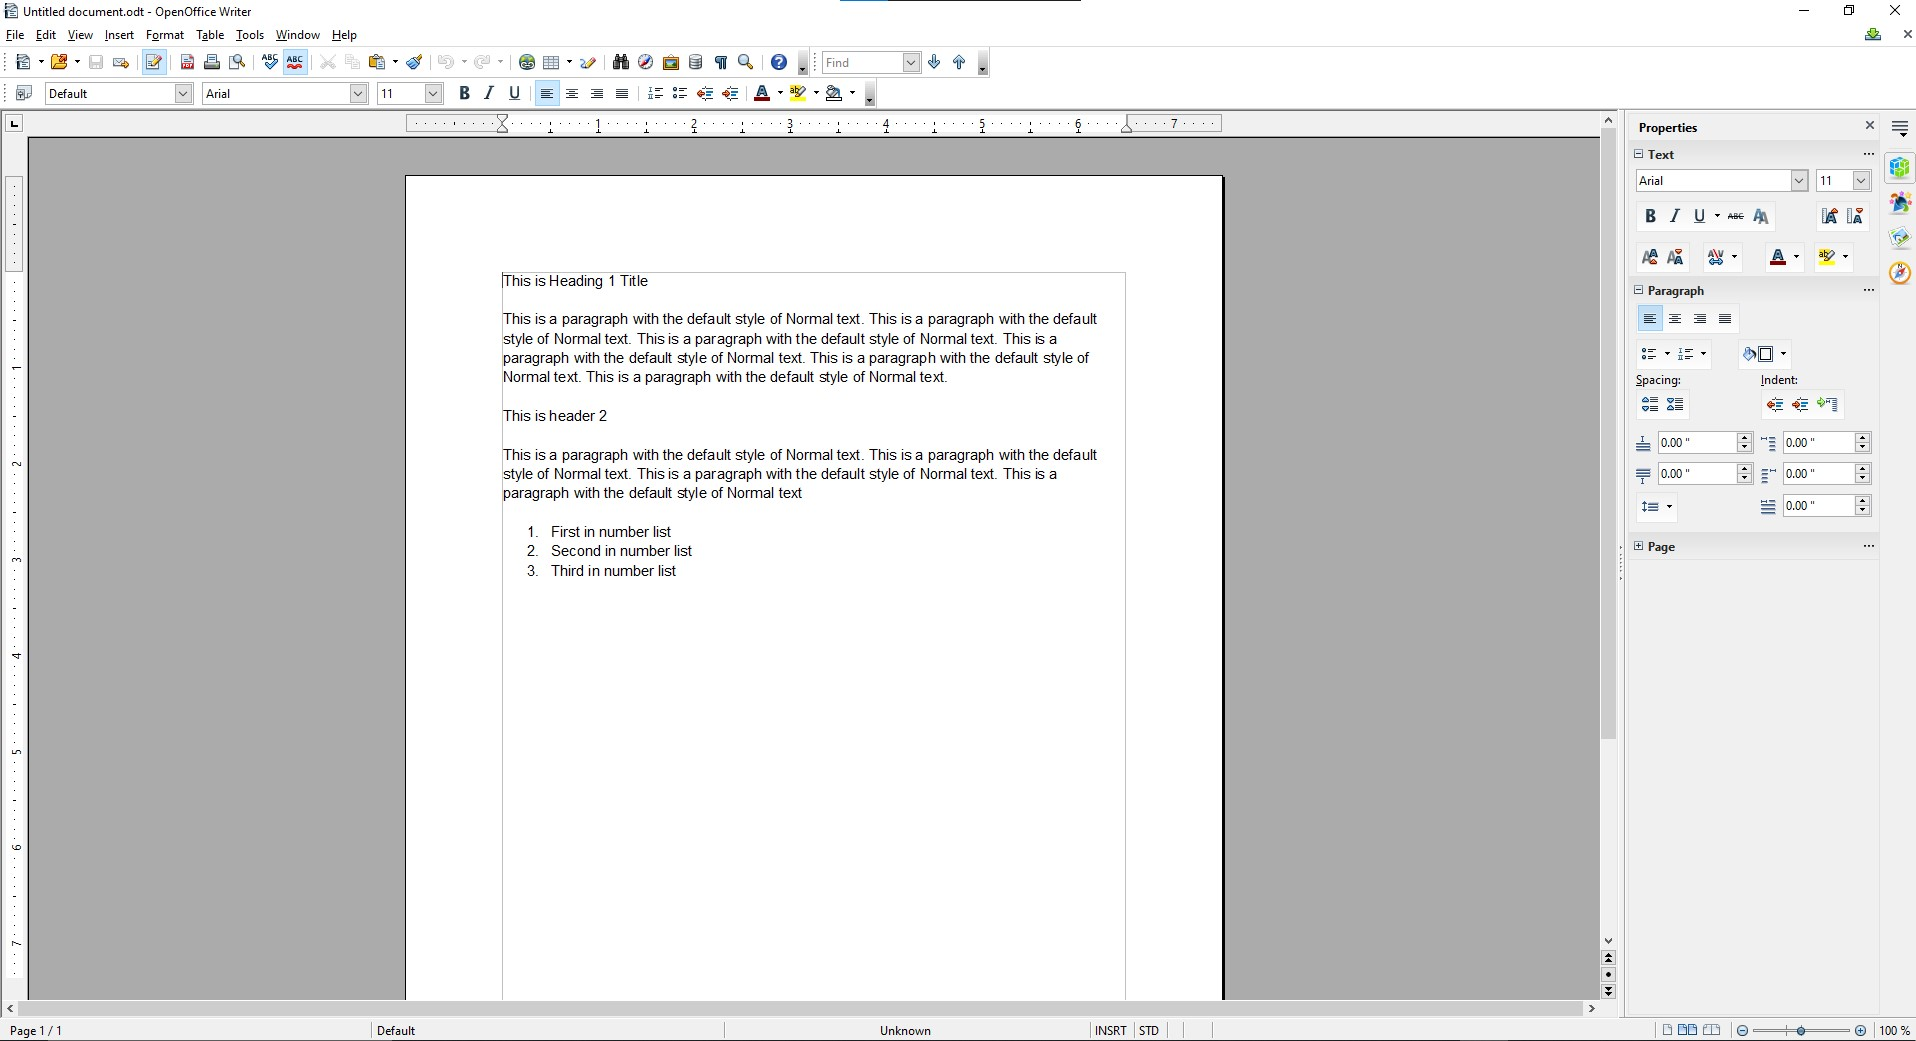 Step 4: Open the file using OpenOffice